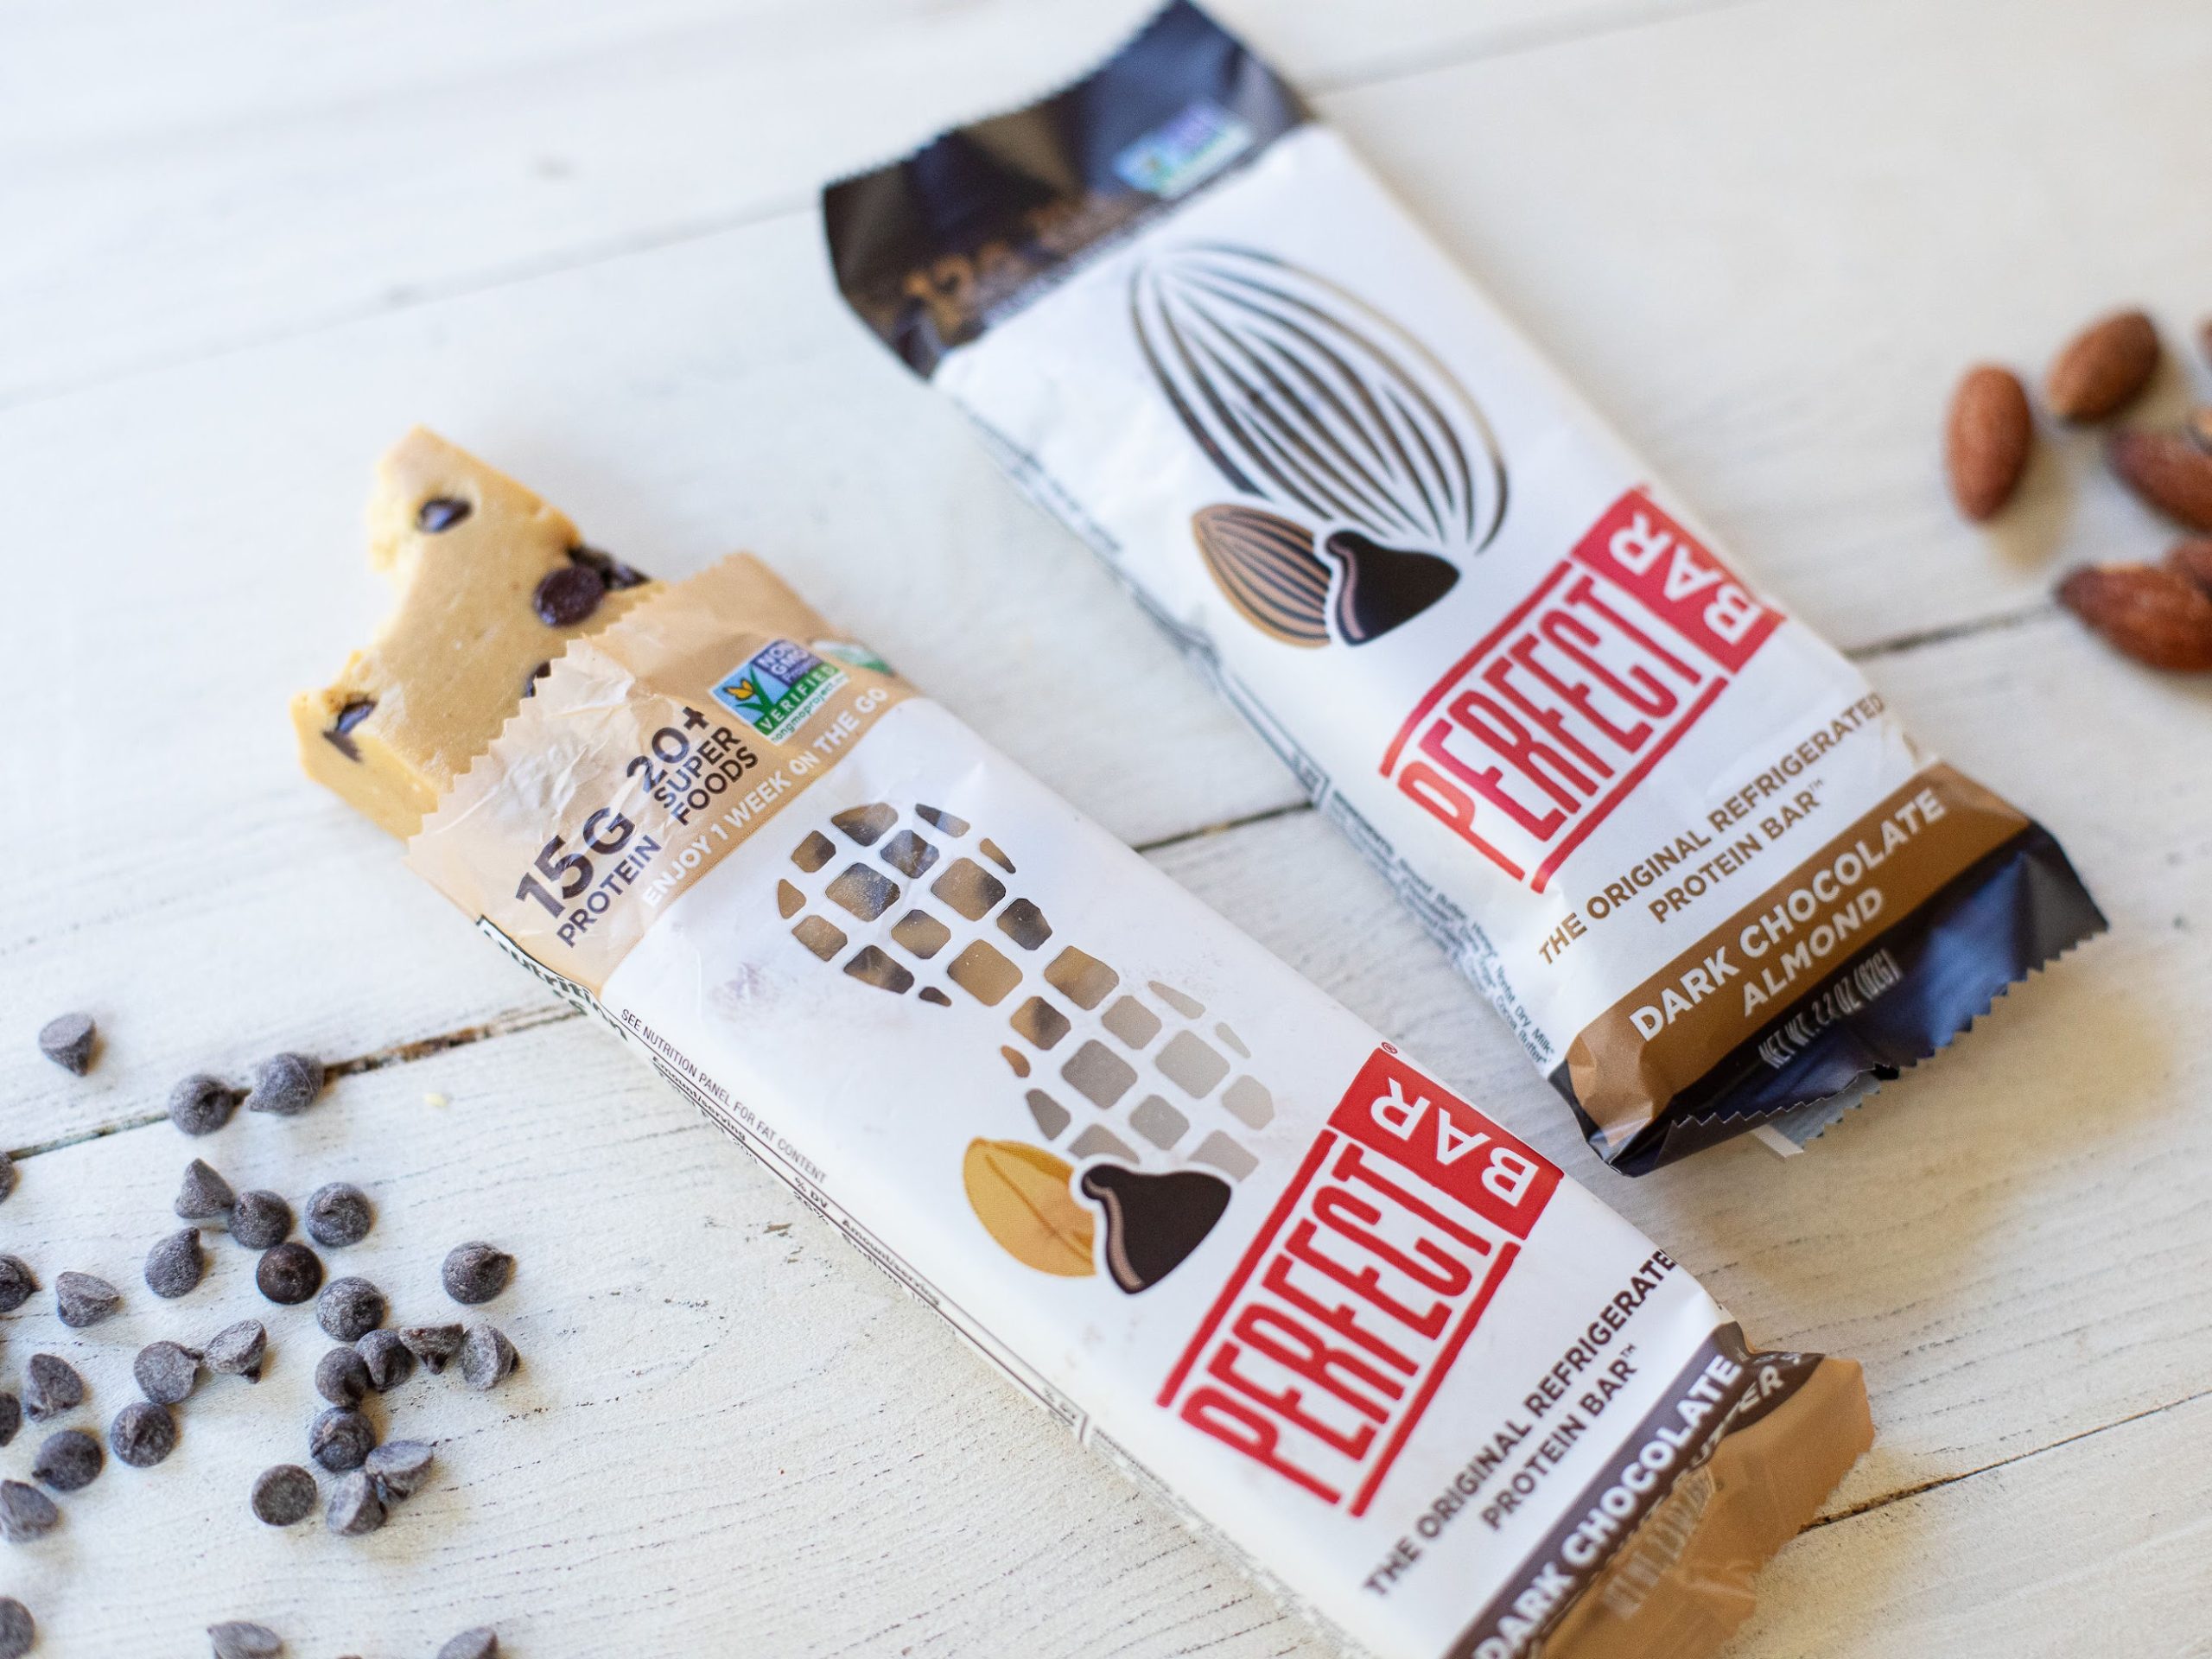 Get Your Favorite Perfect Bar For As Low As FREE At Publix